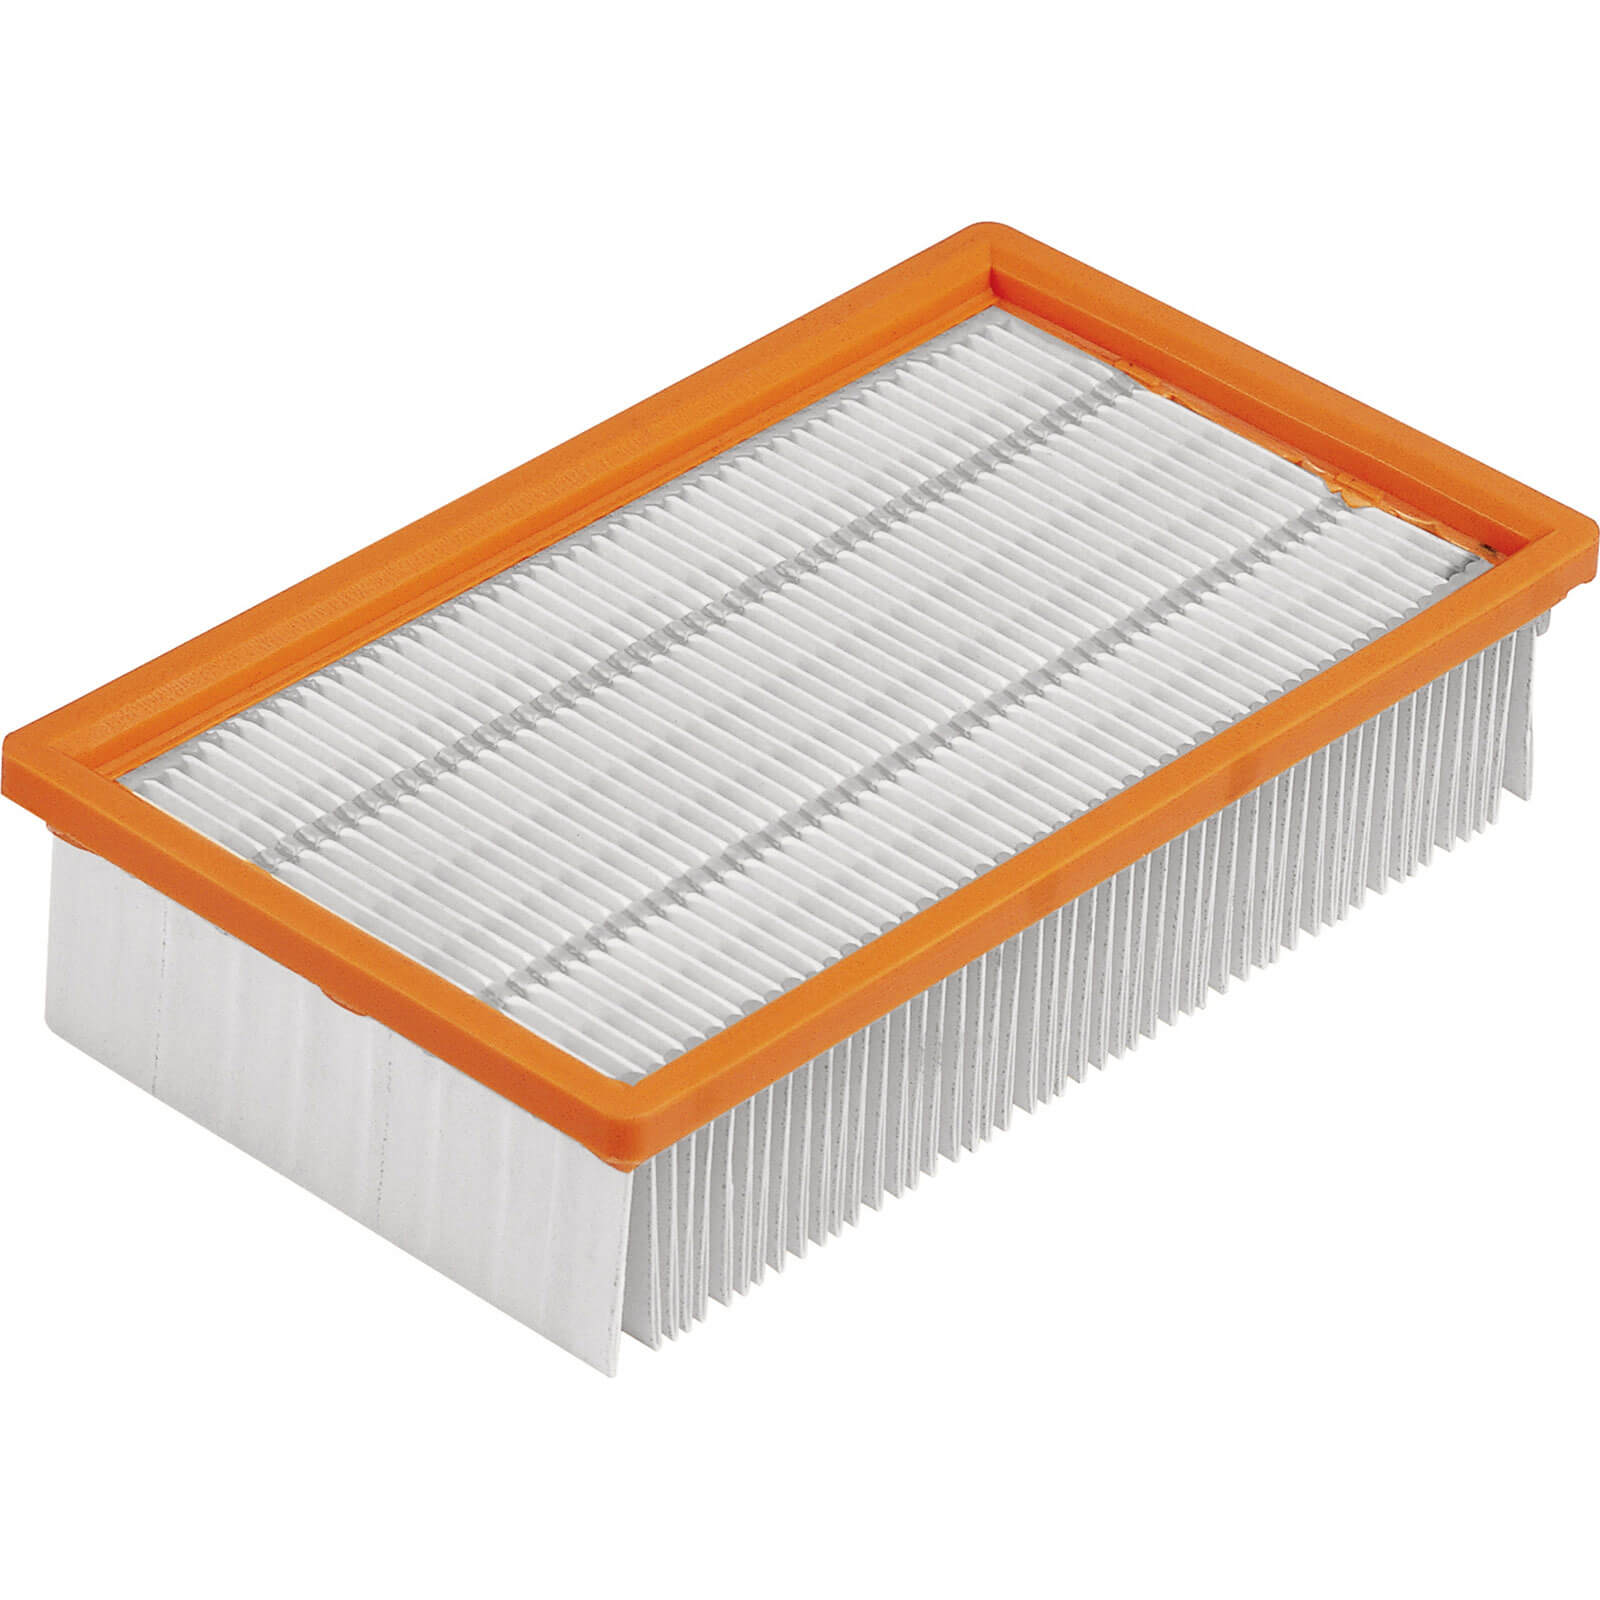 Image of Flex Fold Flat Filter for VCE35 and VCE45 Vacuum Cleaners